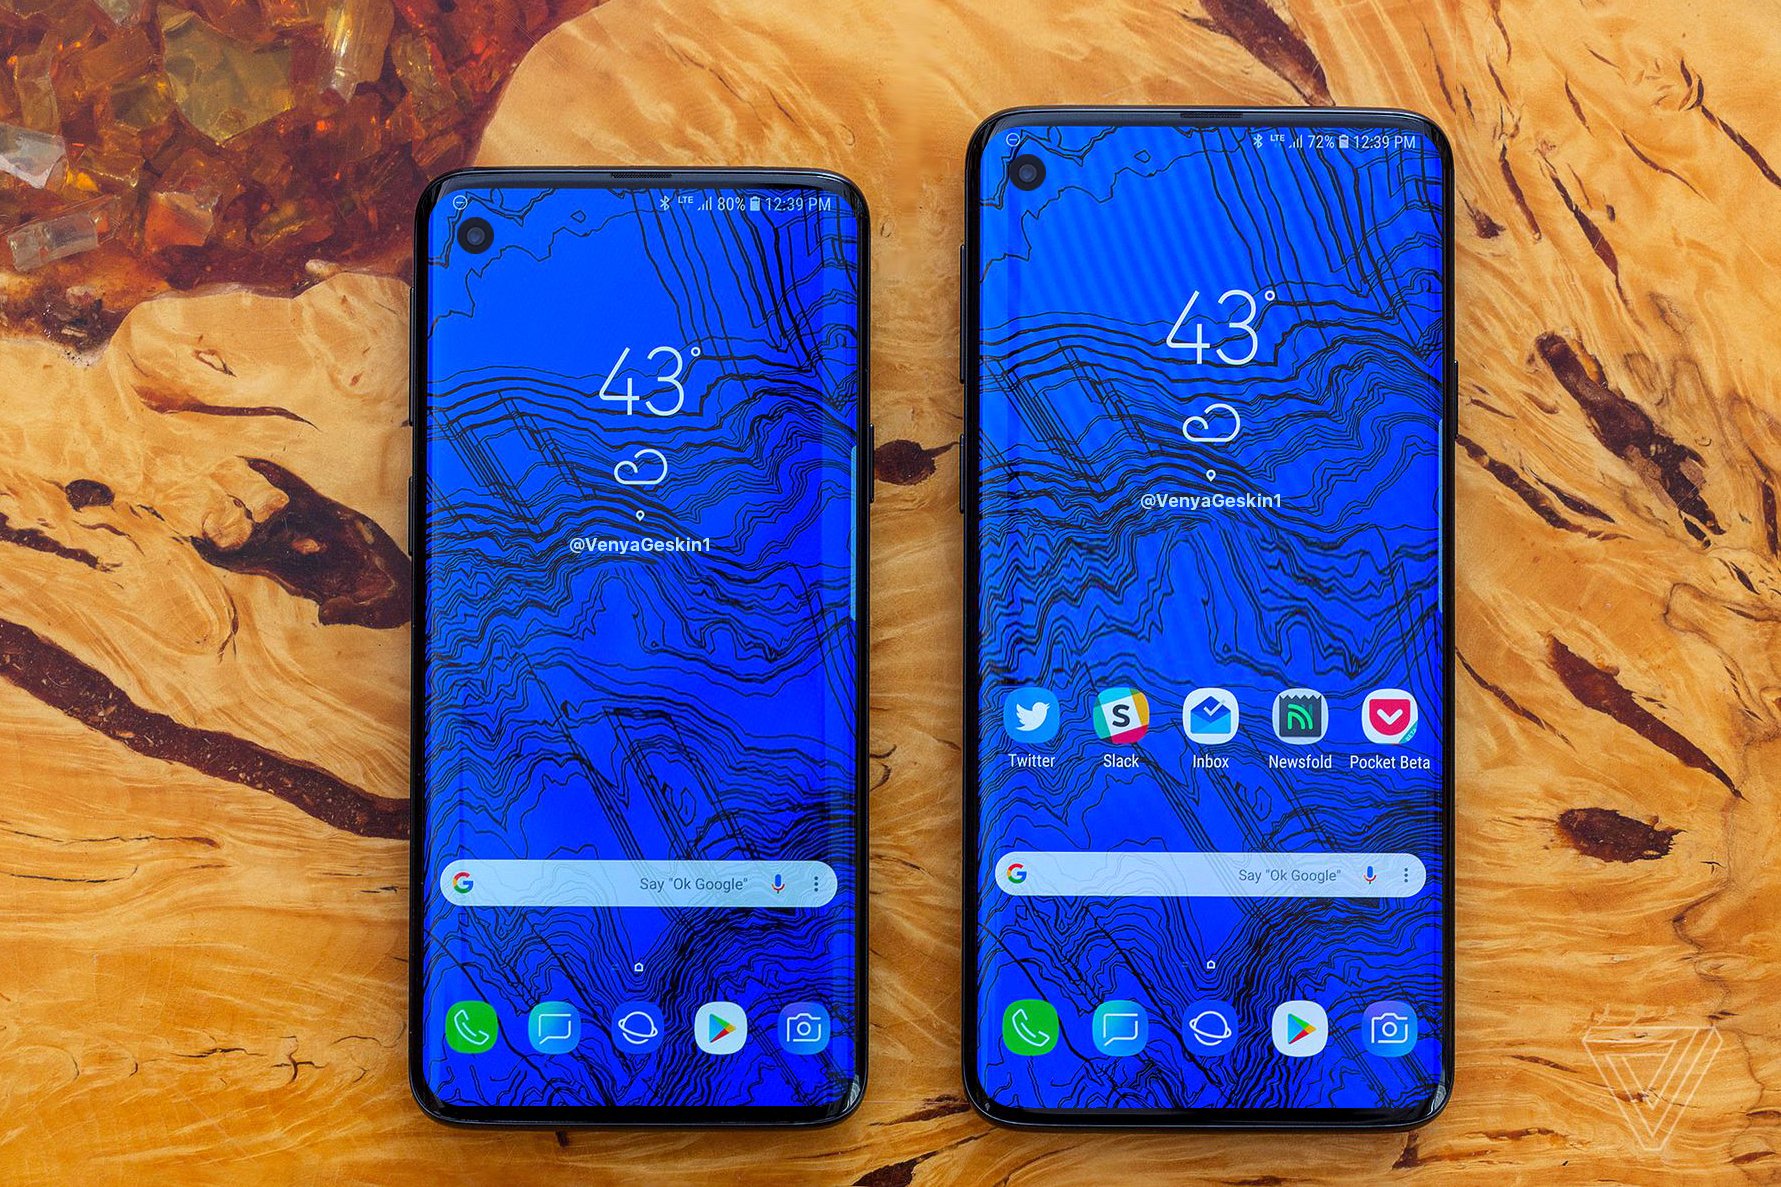 Samsung sends out invitations for Galaxy S10 launch 1